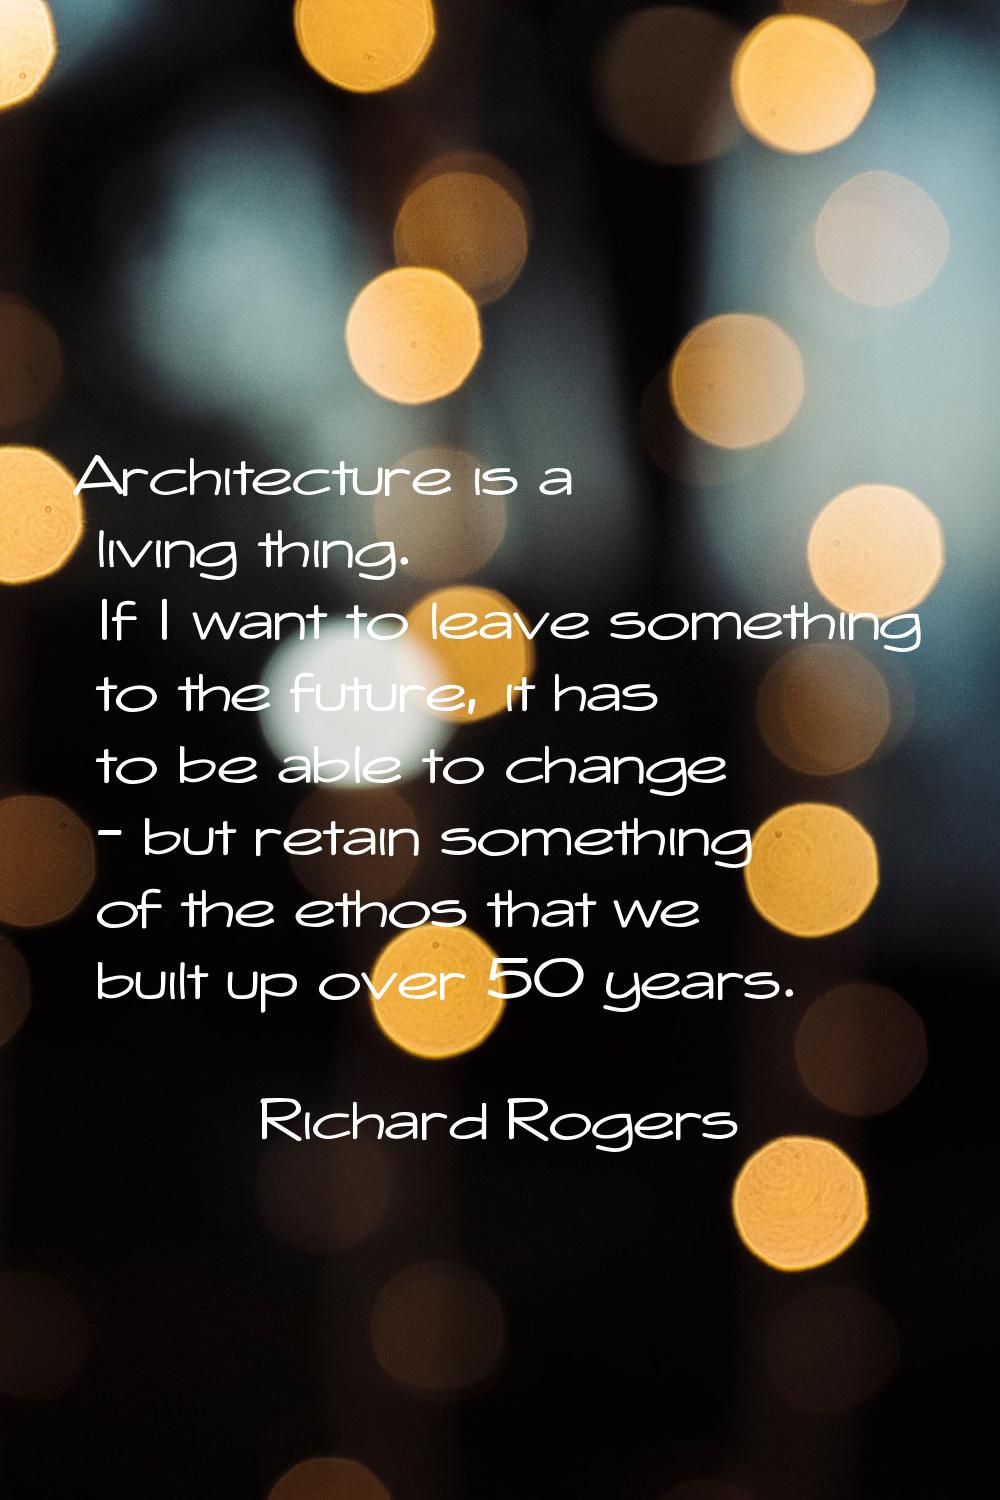 Architecture is a living thing. If I want to leave something to the future, it has to be able to ch